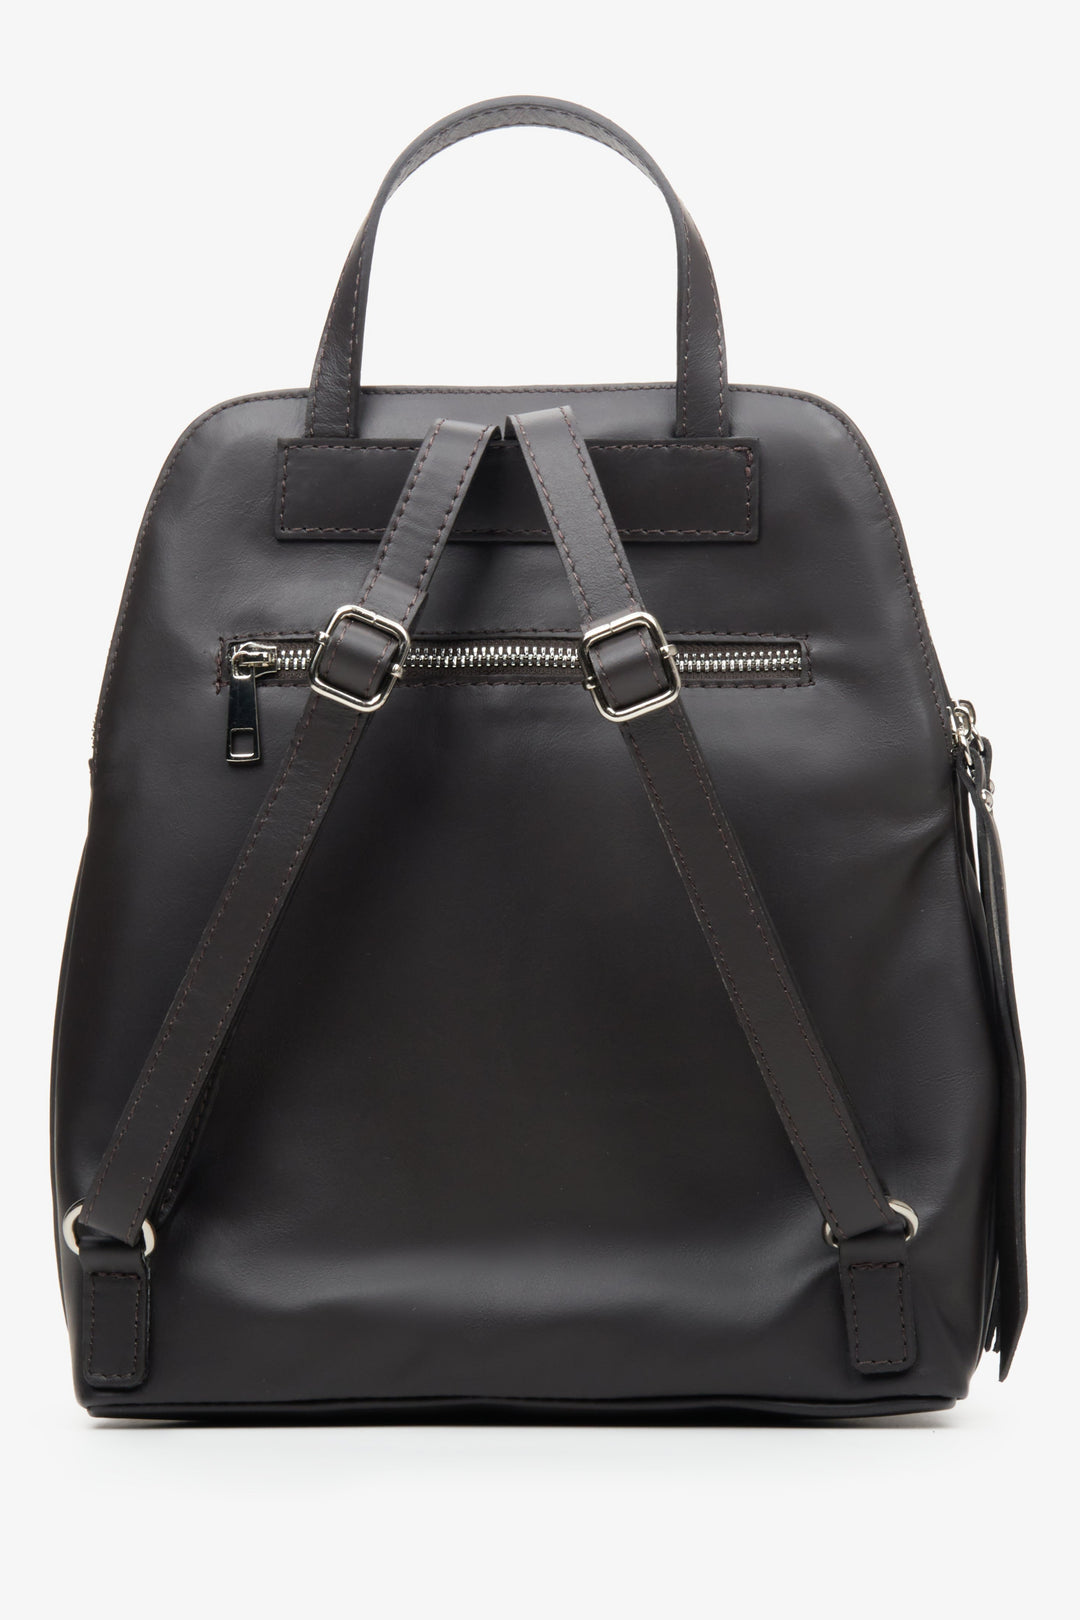 Women's dark brown leather backpack by Estro.